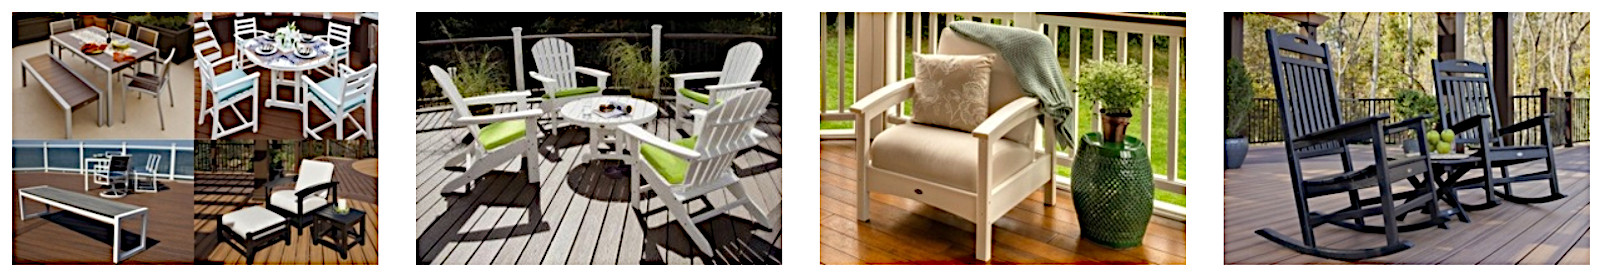 Trex outdoor furniture at a reduced price